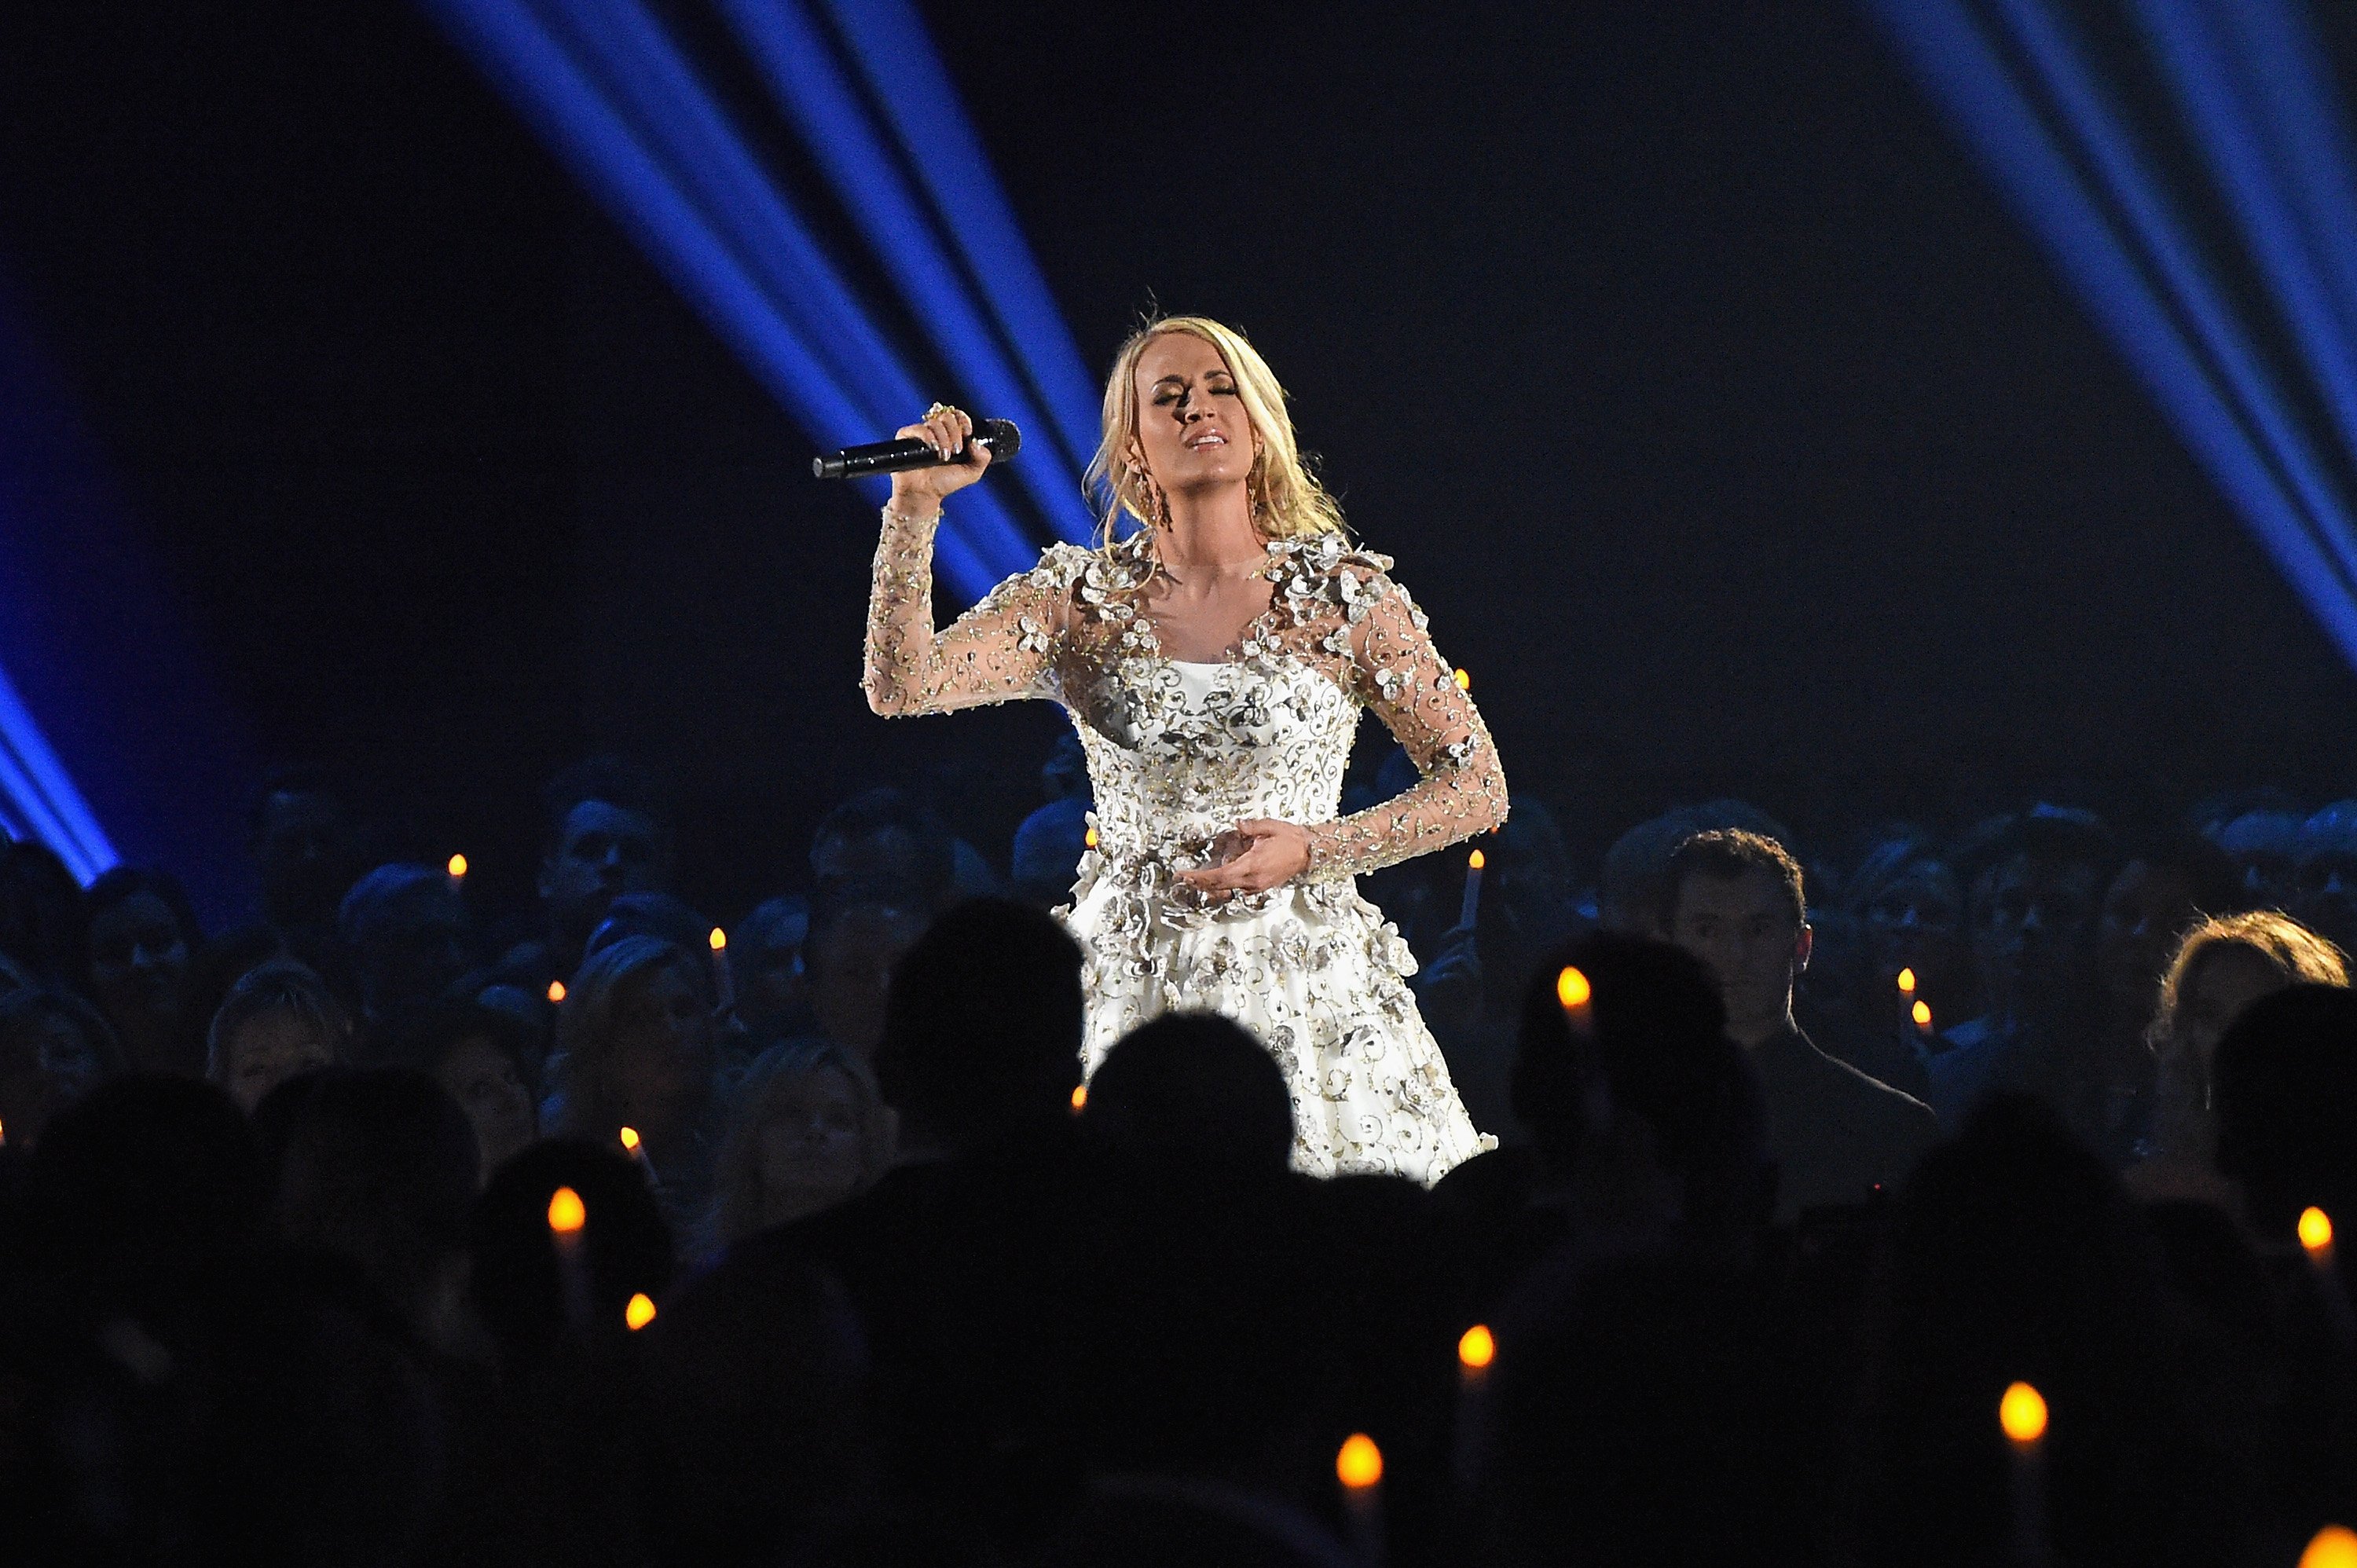  Host Carrie Underwood performs onstage at the 51st annual CMA Awards at the Bridgestone Arena on November 8, 2017 in Nashville, Tennessee